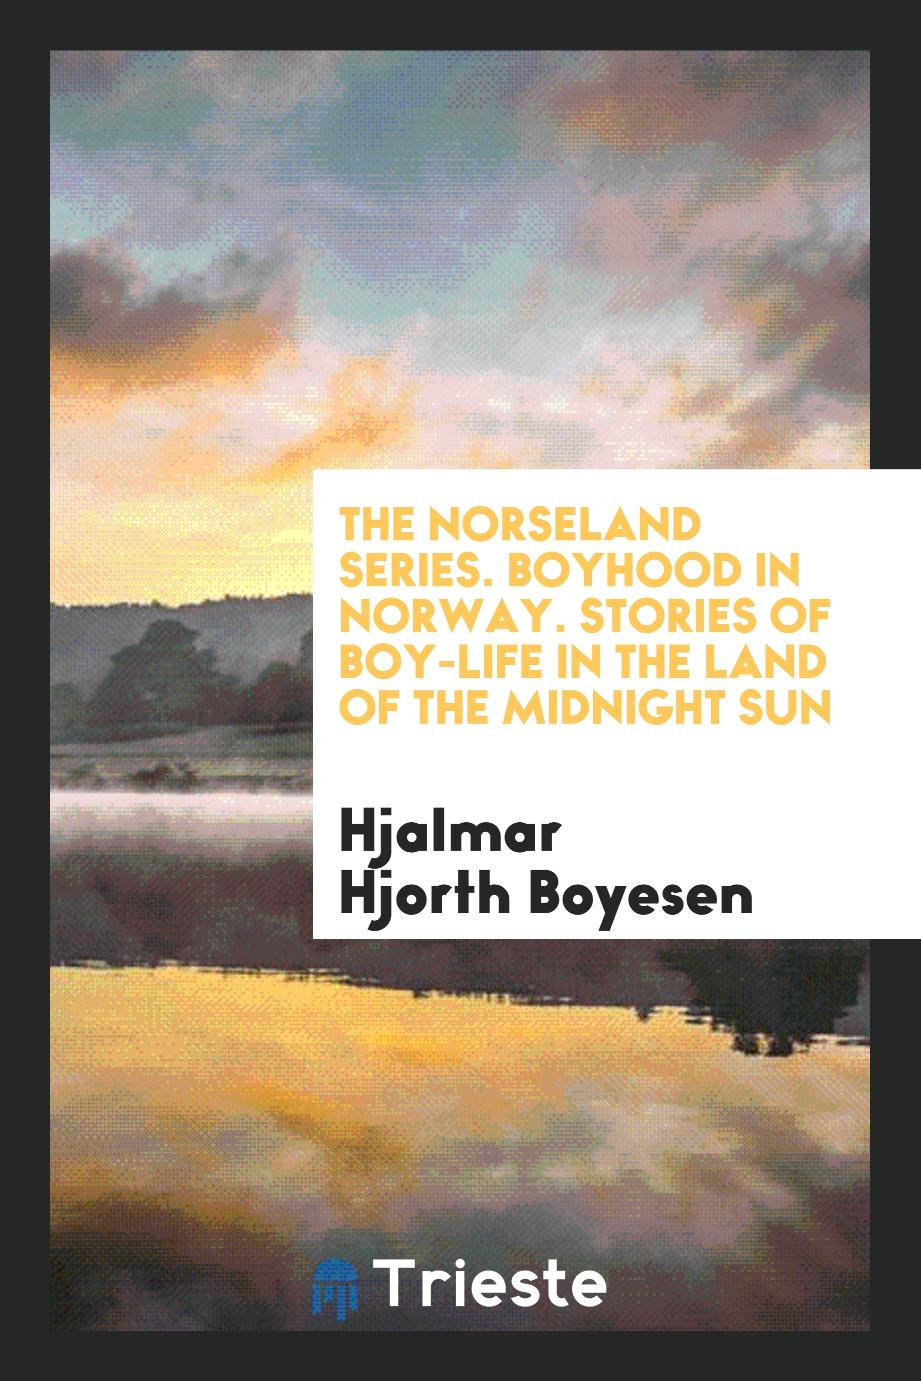 The Norseland series. Boyhood in Norway. Stories of boy-life in the Land of the midnight sun